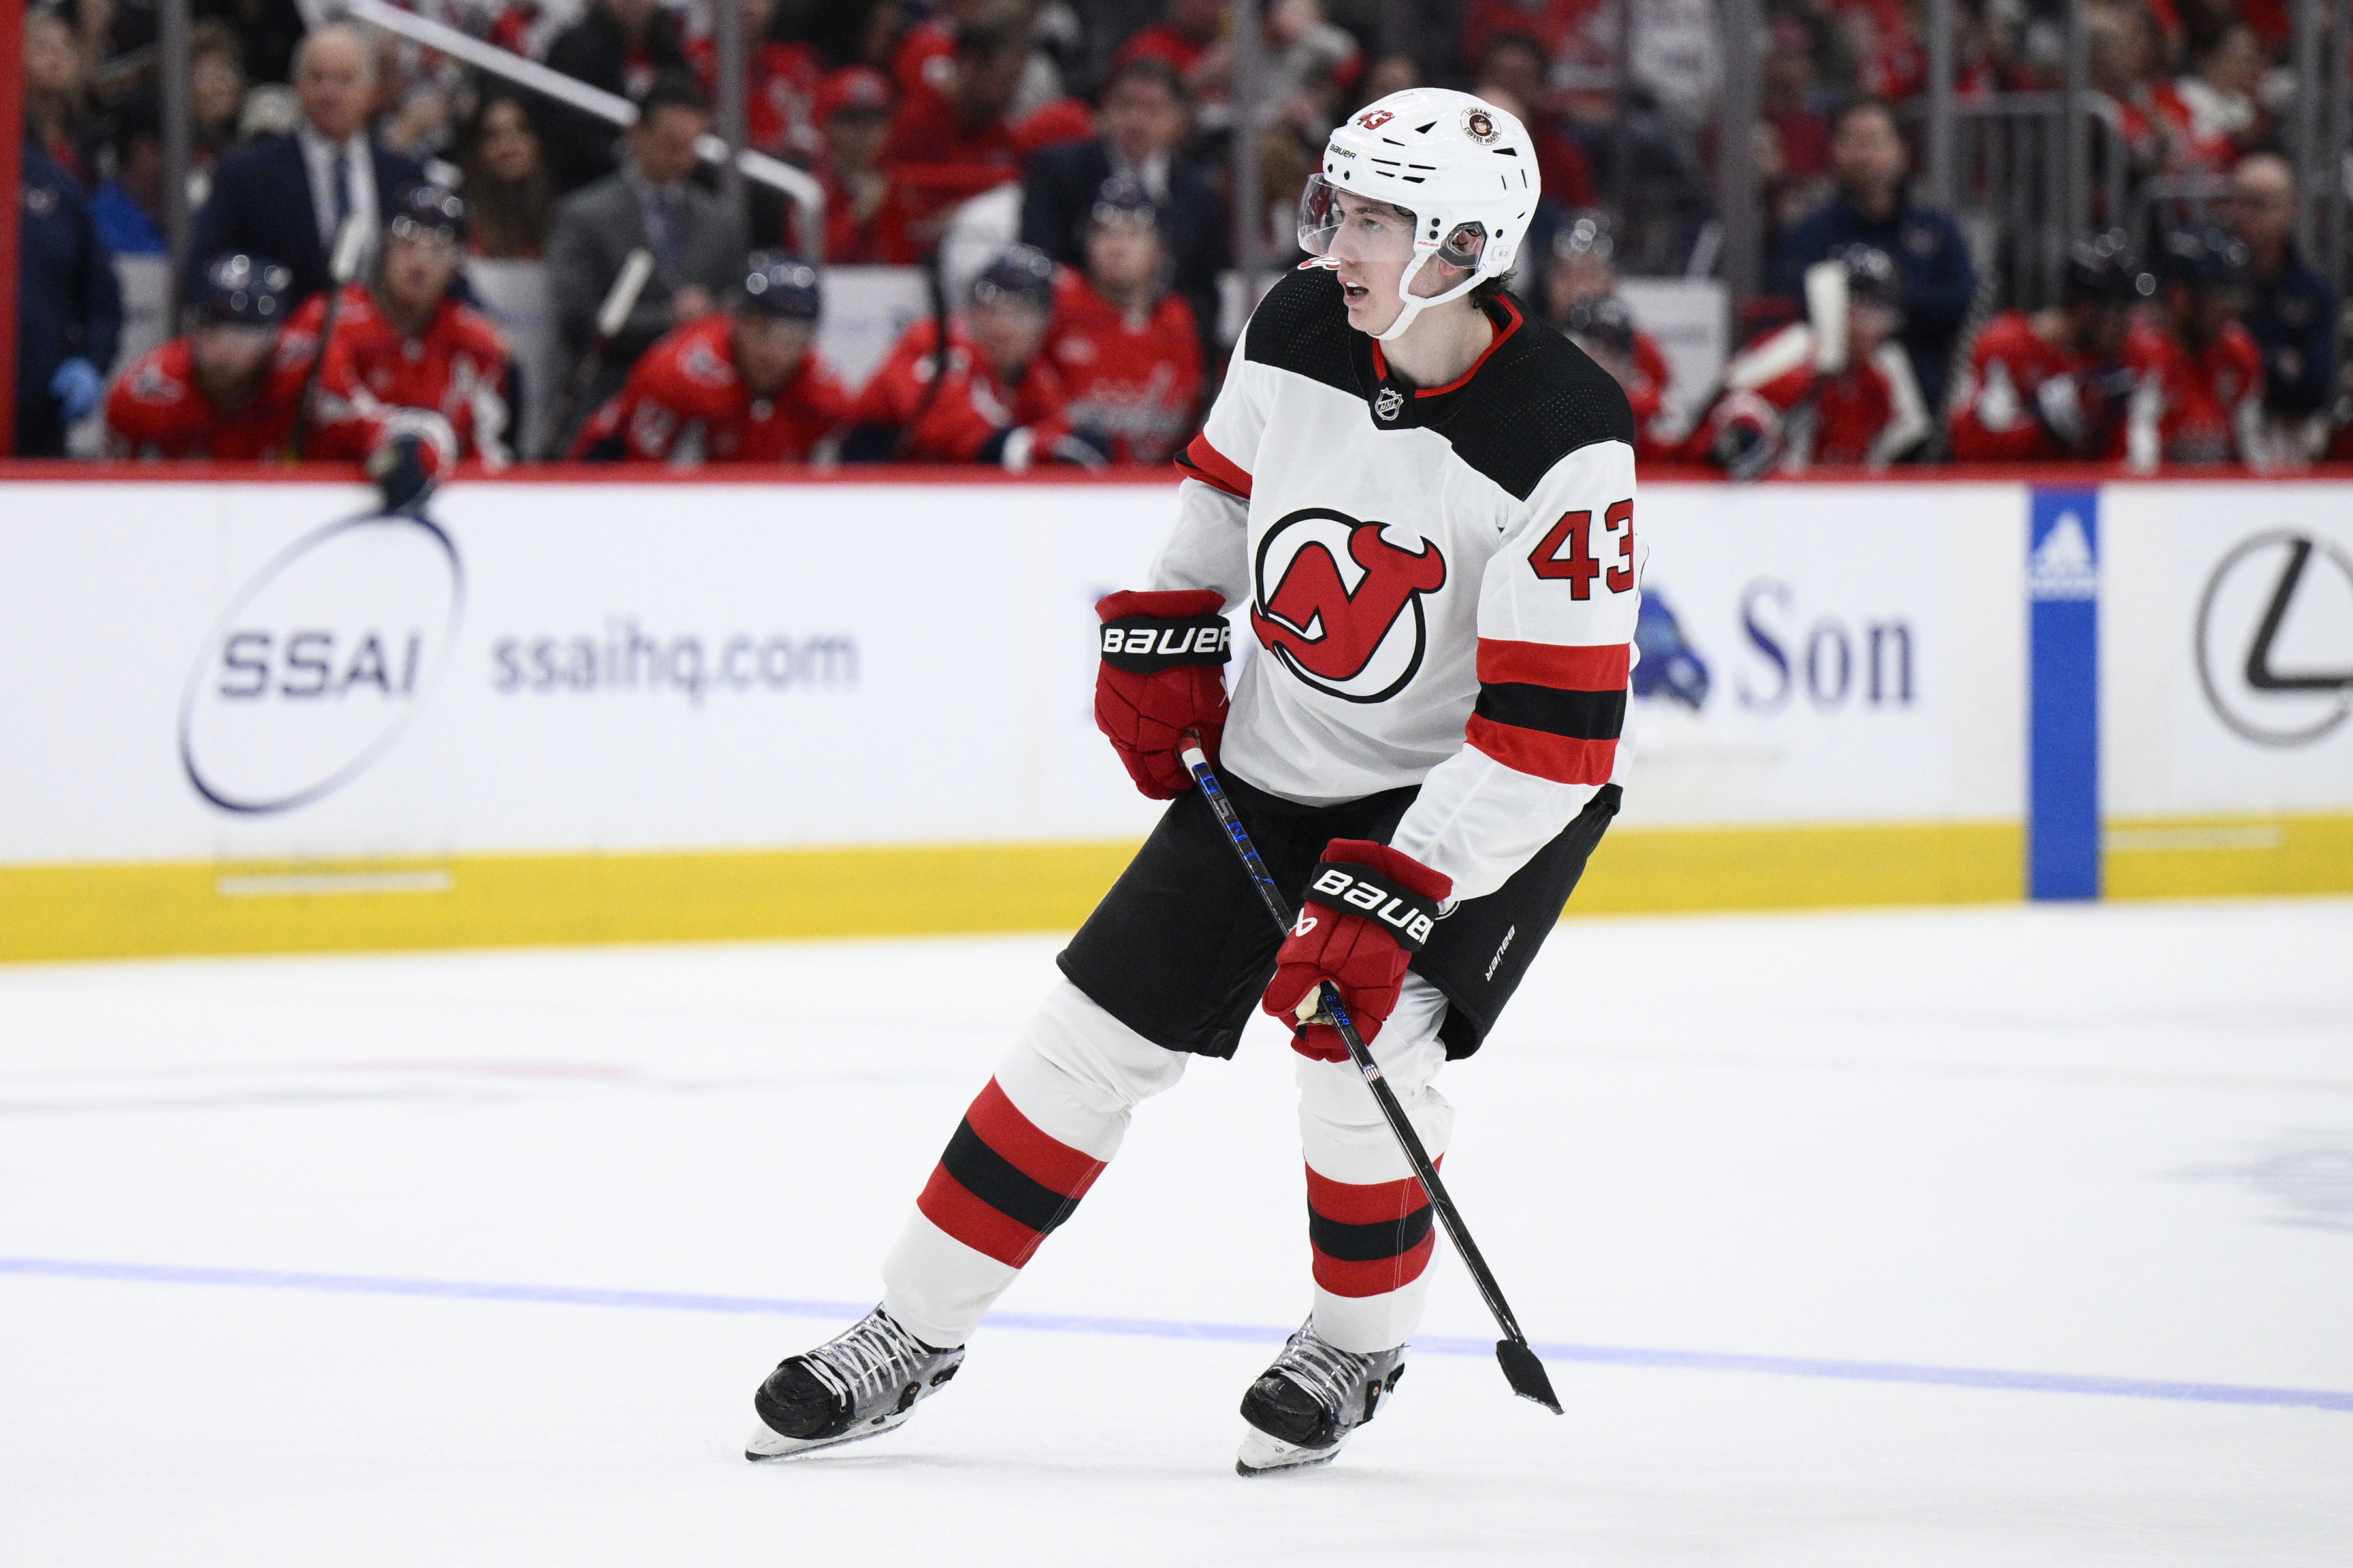 Devils start Schmid, add Graves to blue line for must-win Game 5